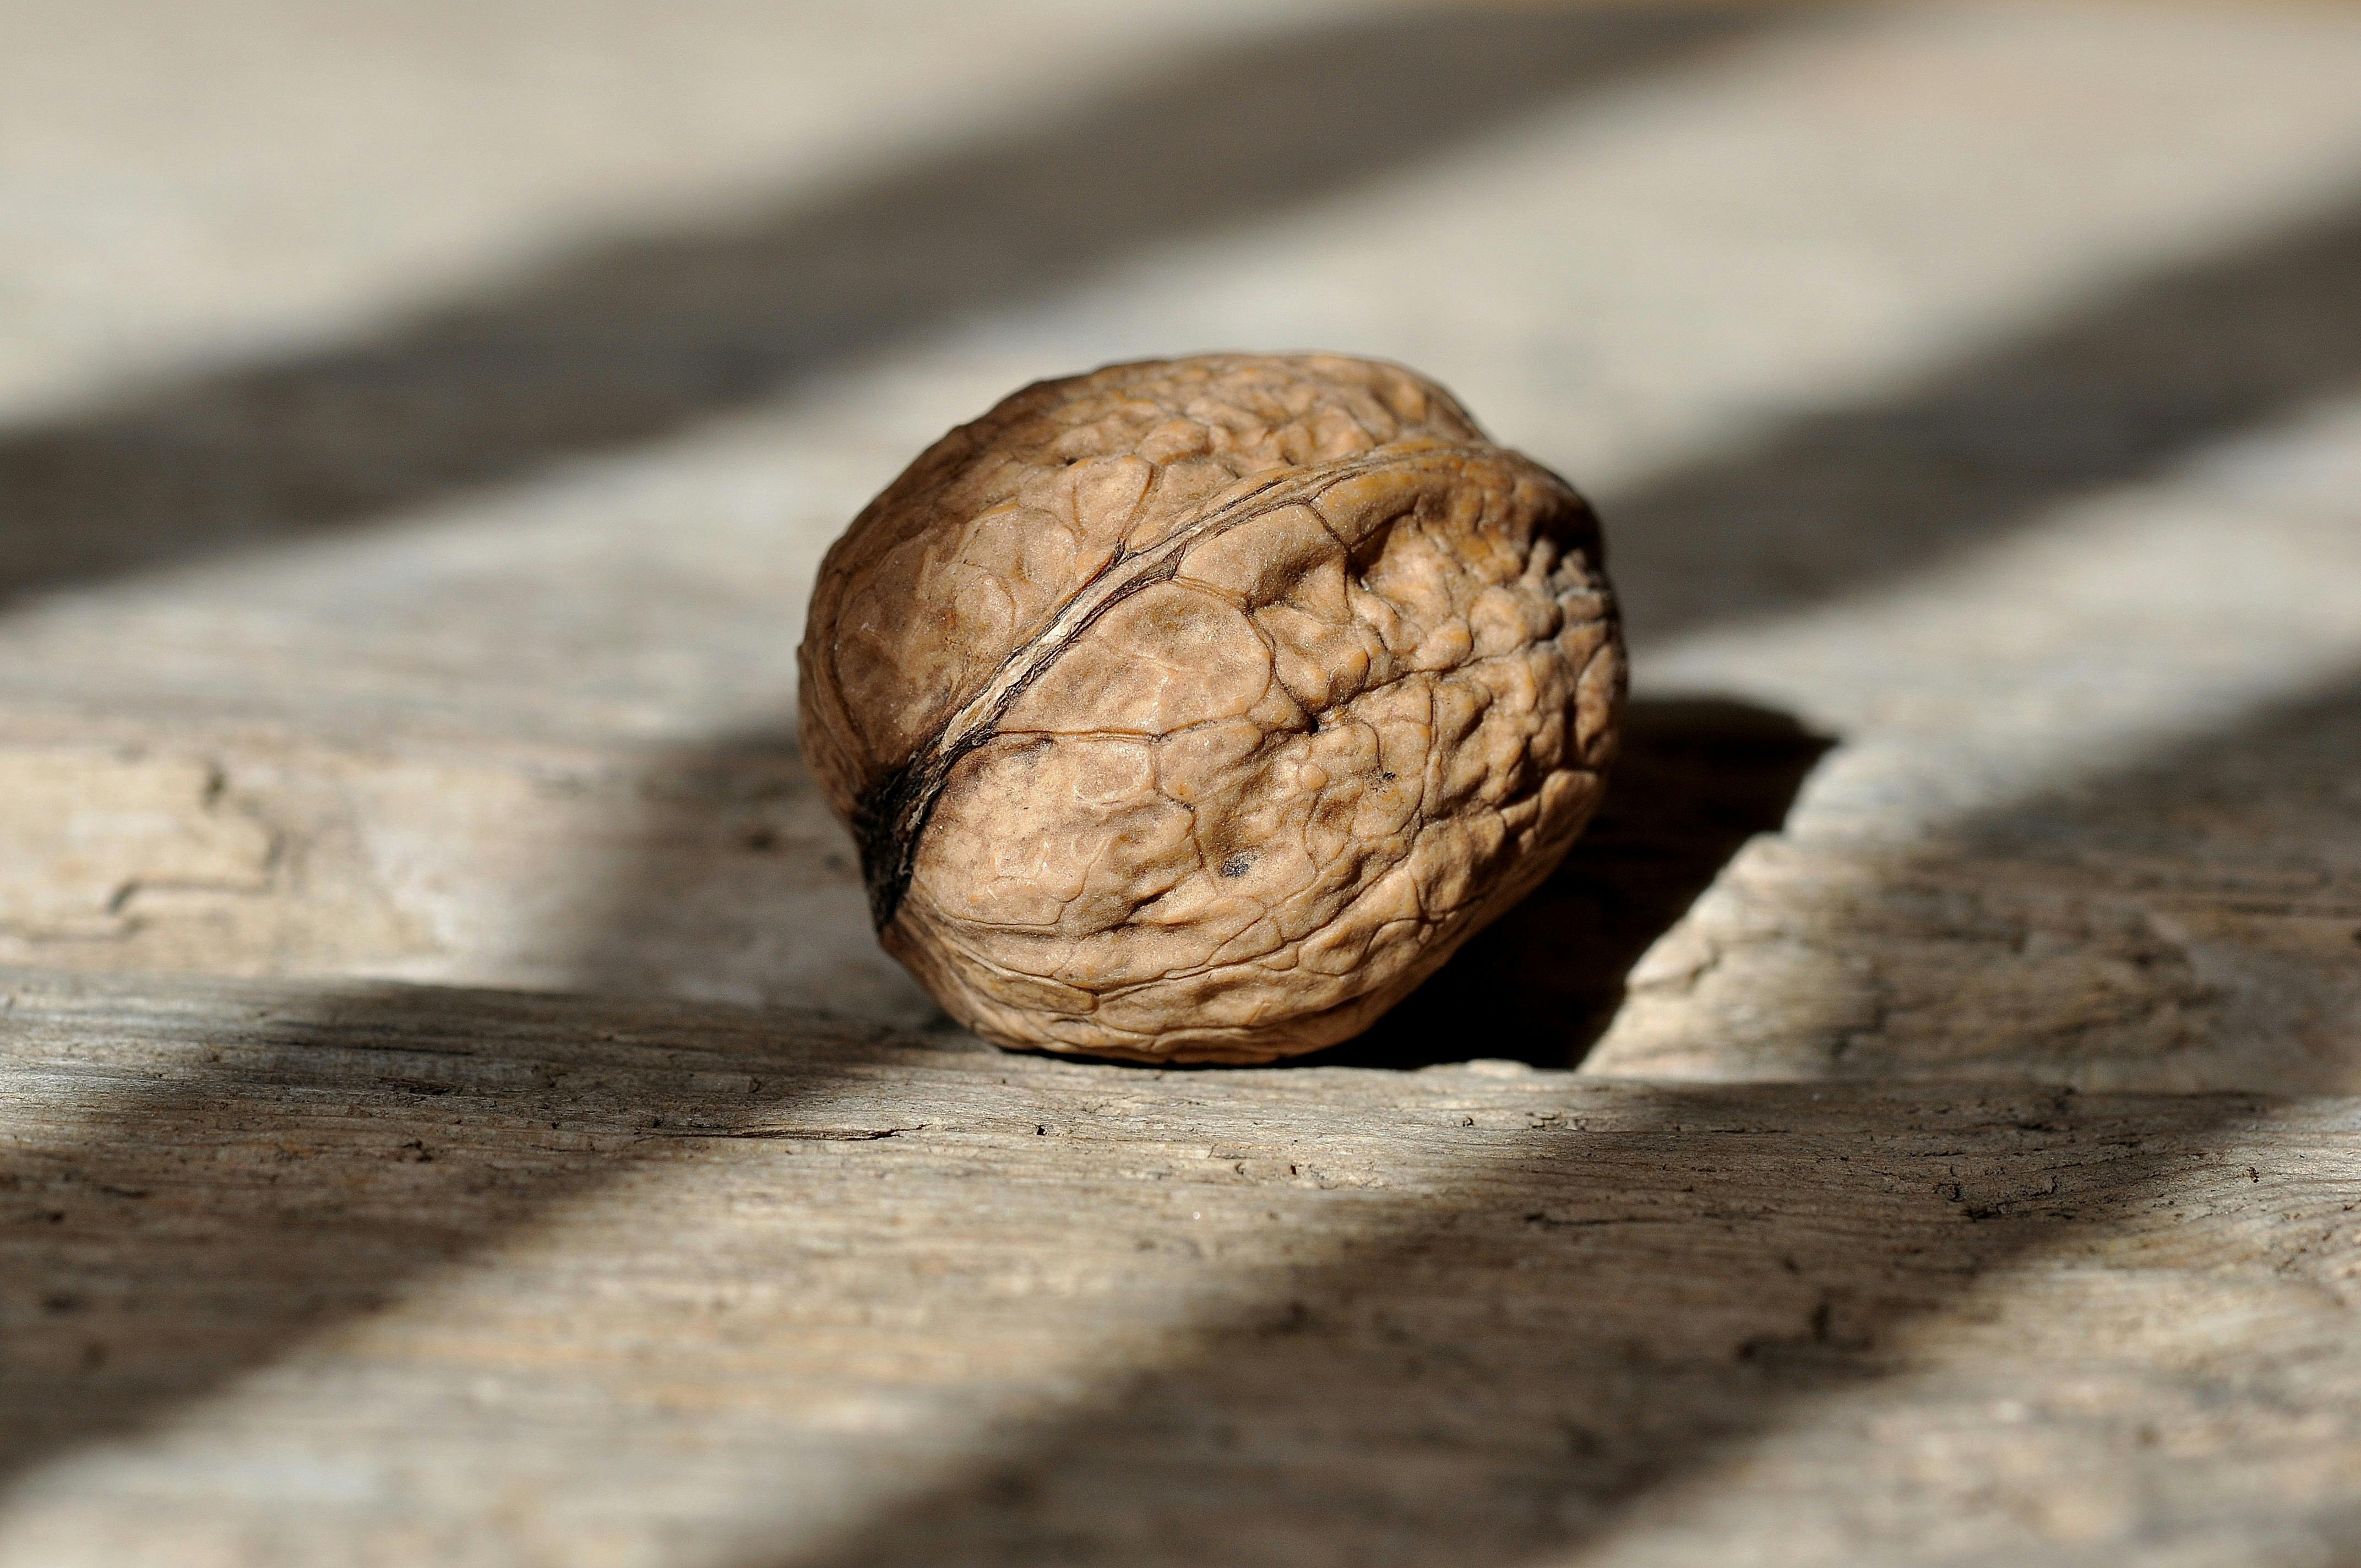 6+ Thousand Crushed Walnuts Royalty-Free Images, Stock Photos